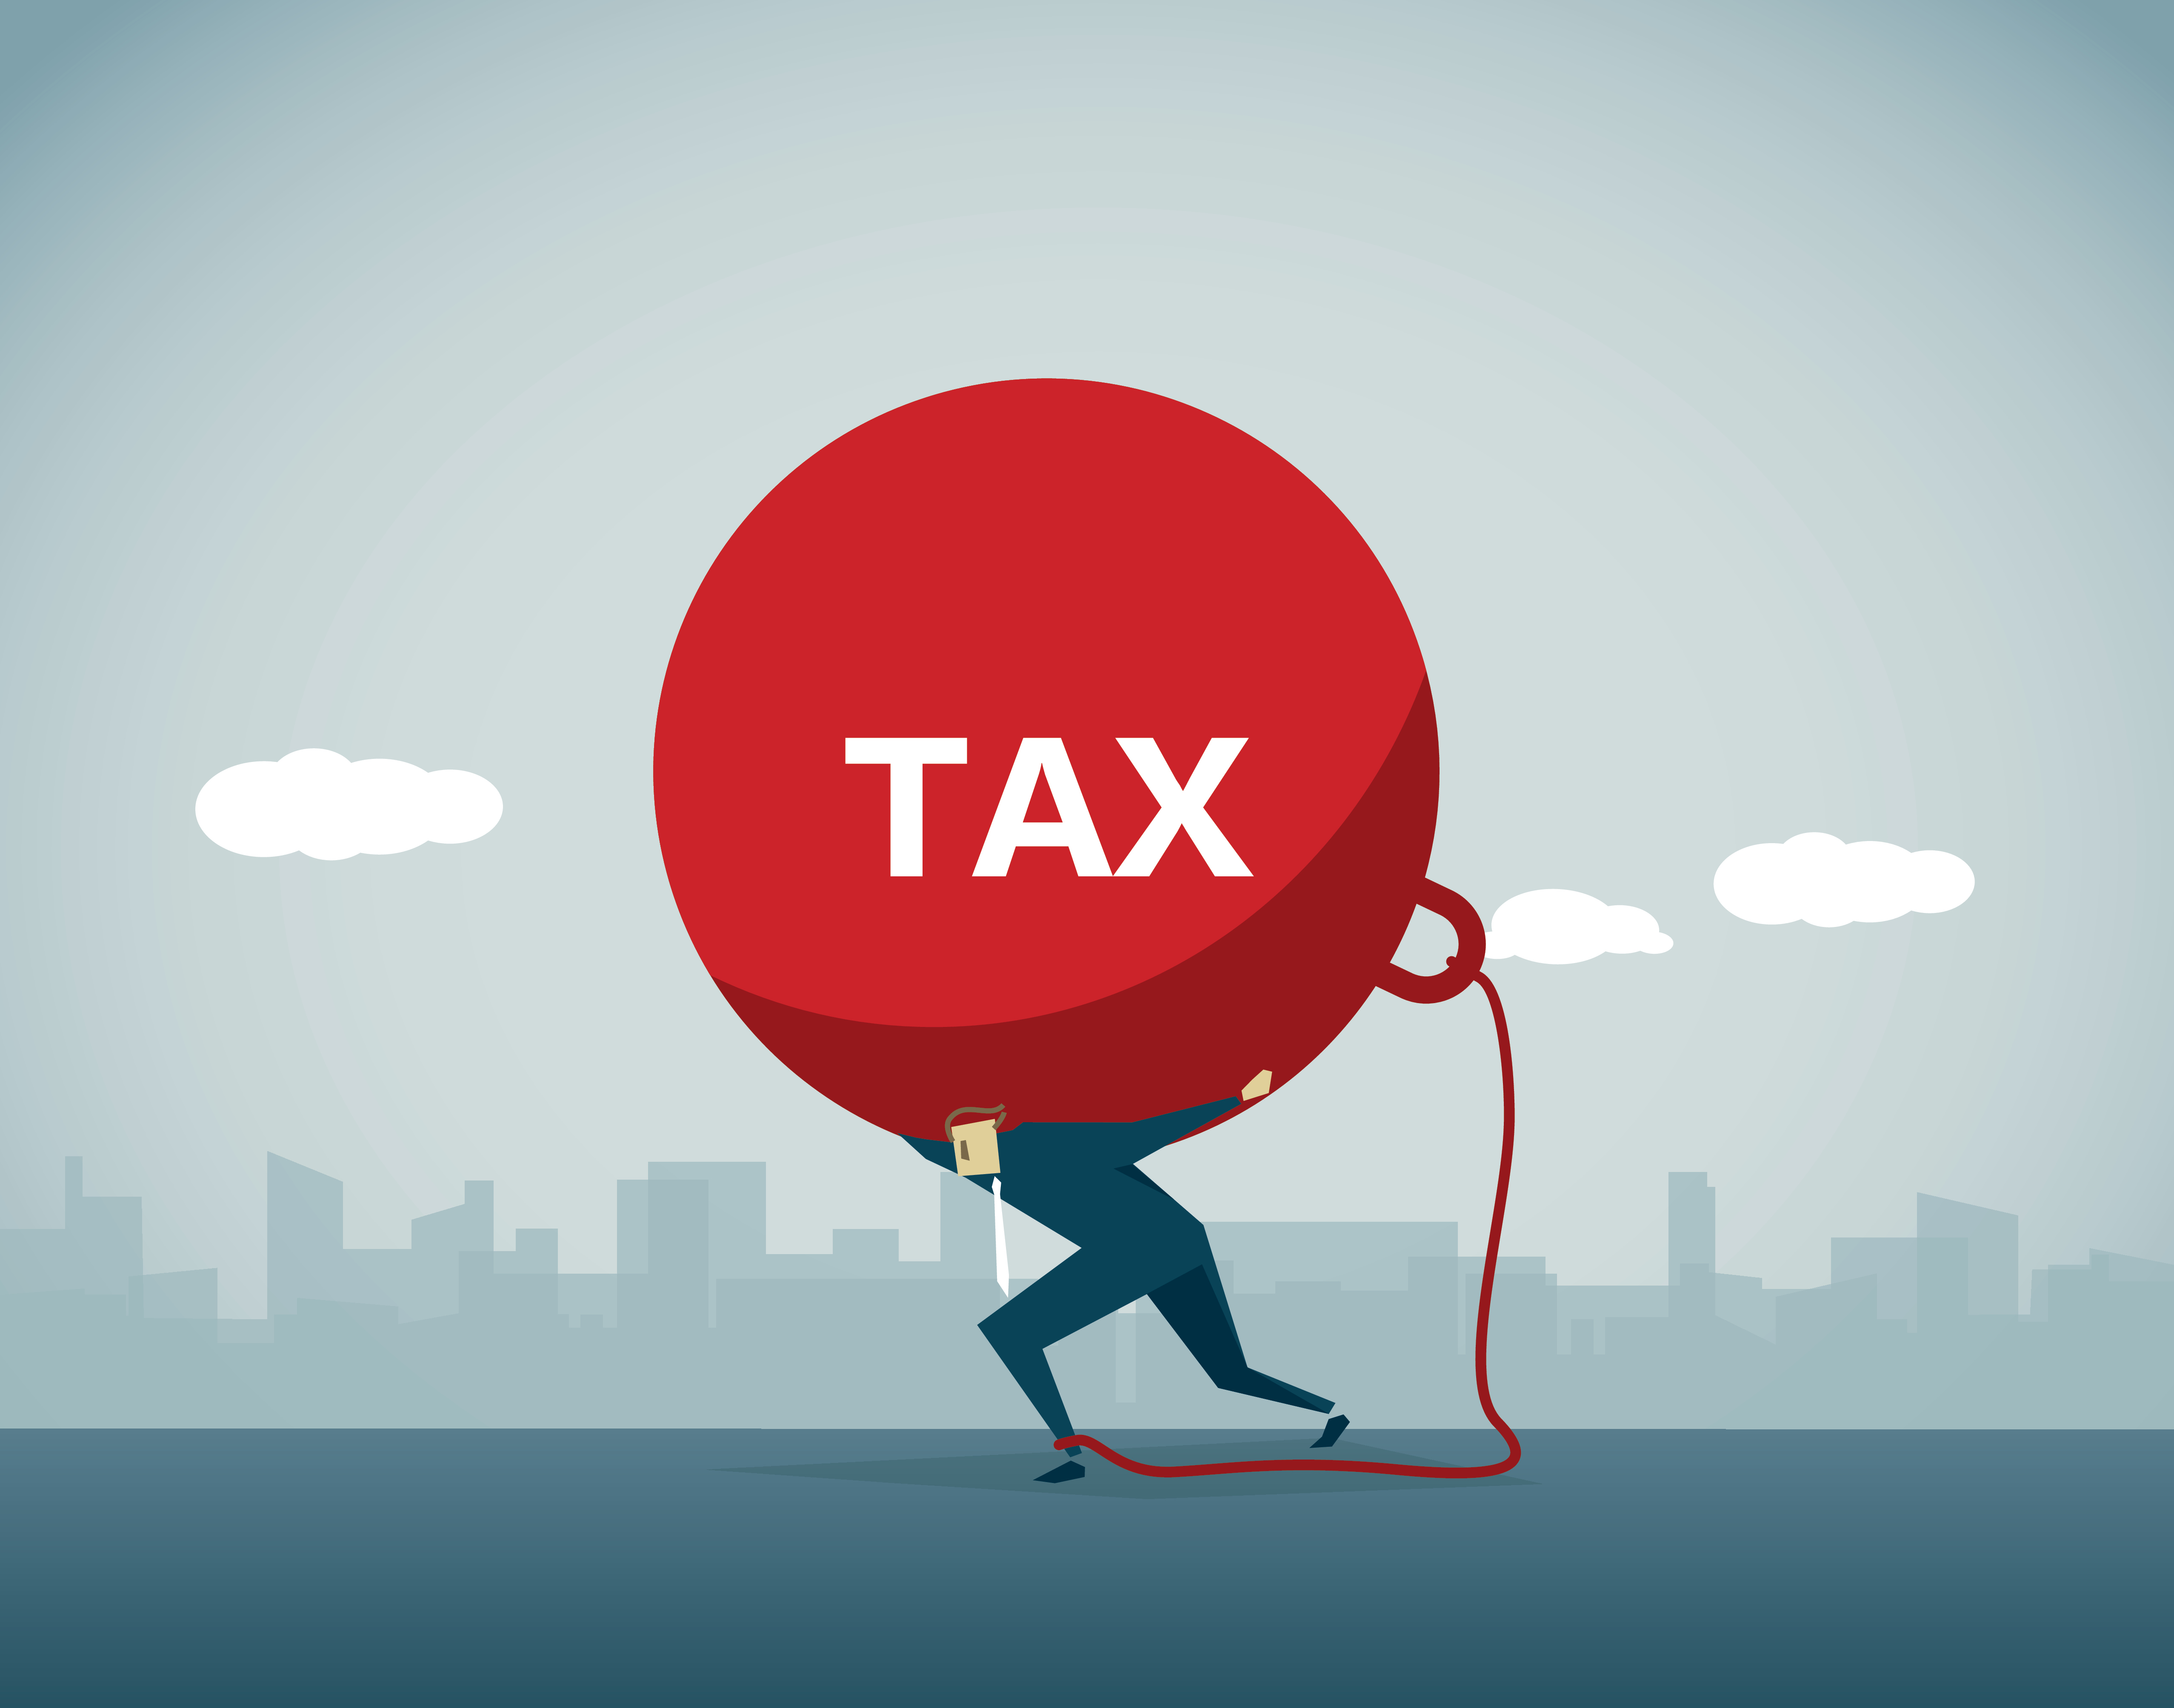 Making tax-wise decisions delivers you $ savings Image